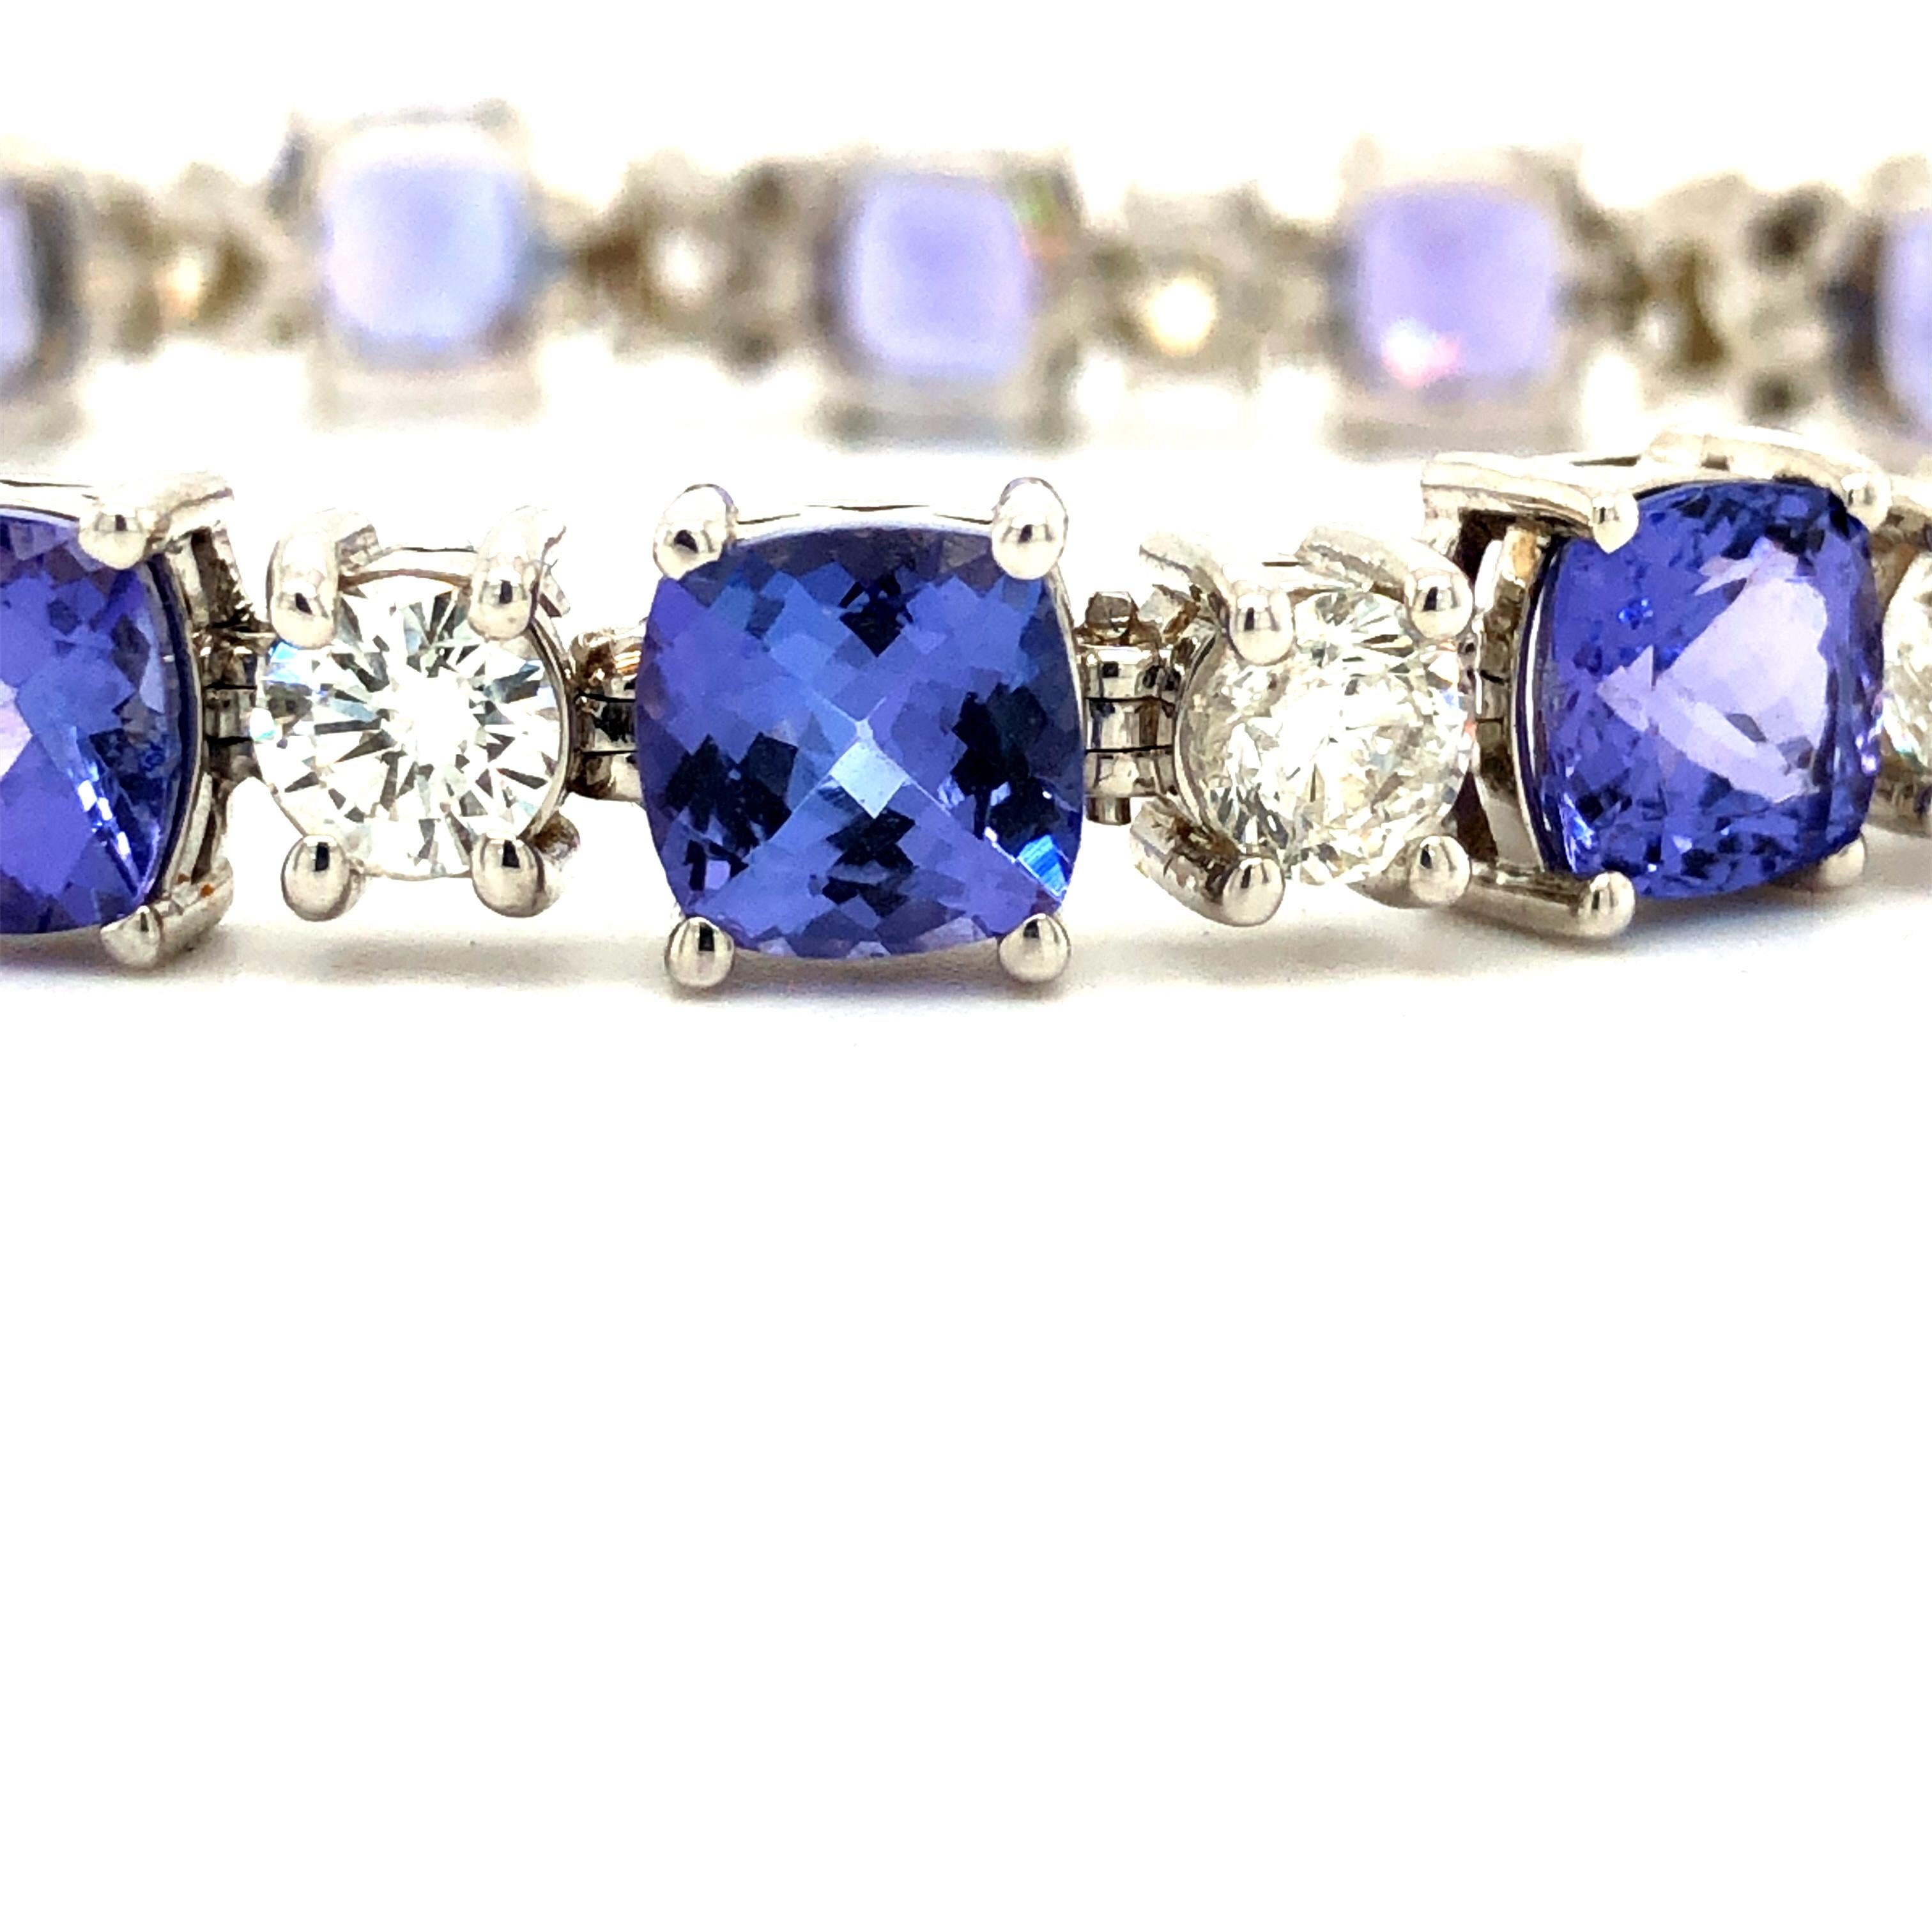 Offered here is an opulent diamond and tanzanite bracelet.
Featuring 15 natural earth mined cushion cut Tanzanites, weighing 22.50 carats total, full of sparkle beautiful lavender purple in colors, interchanged with 15 natural earth mined large